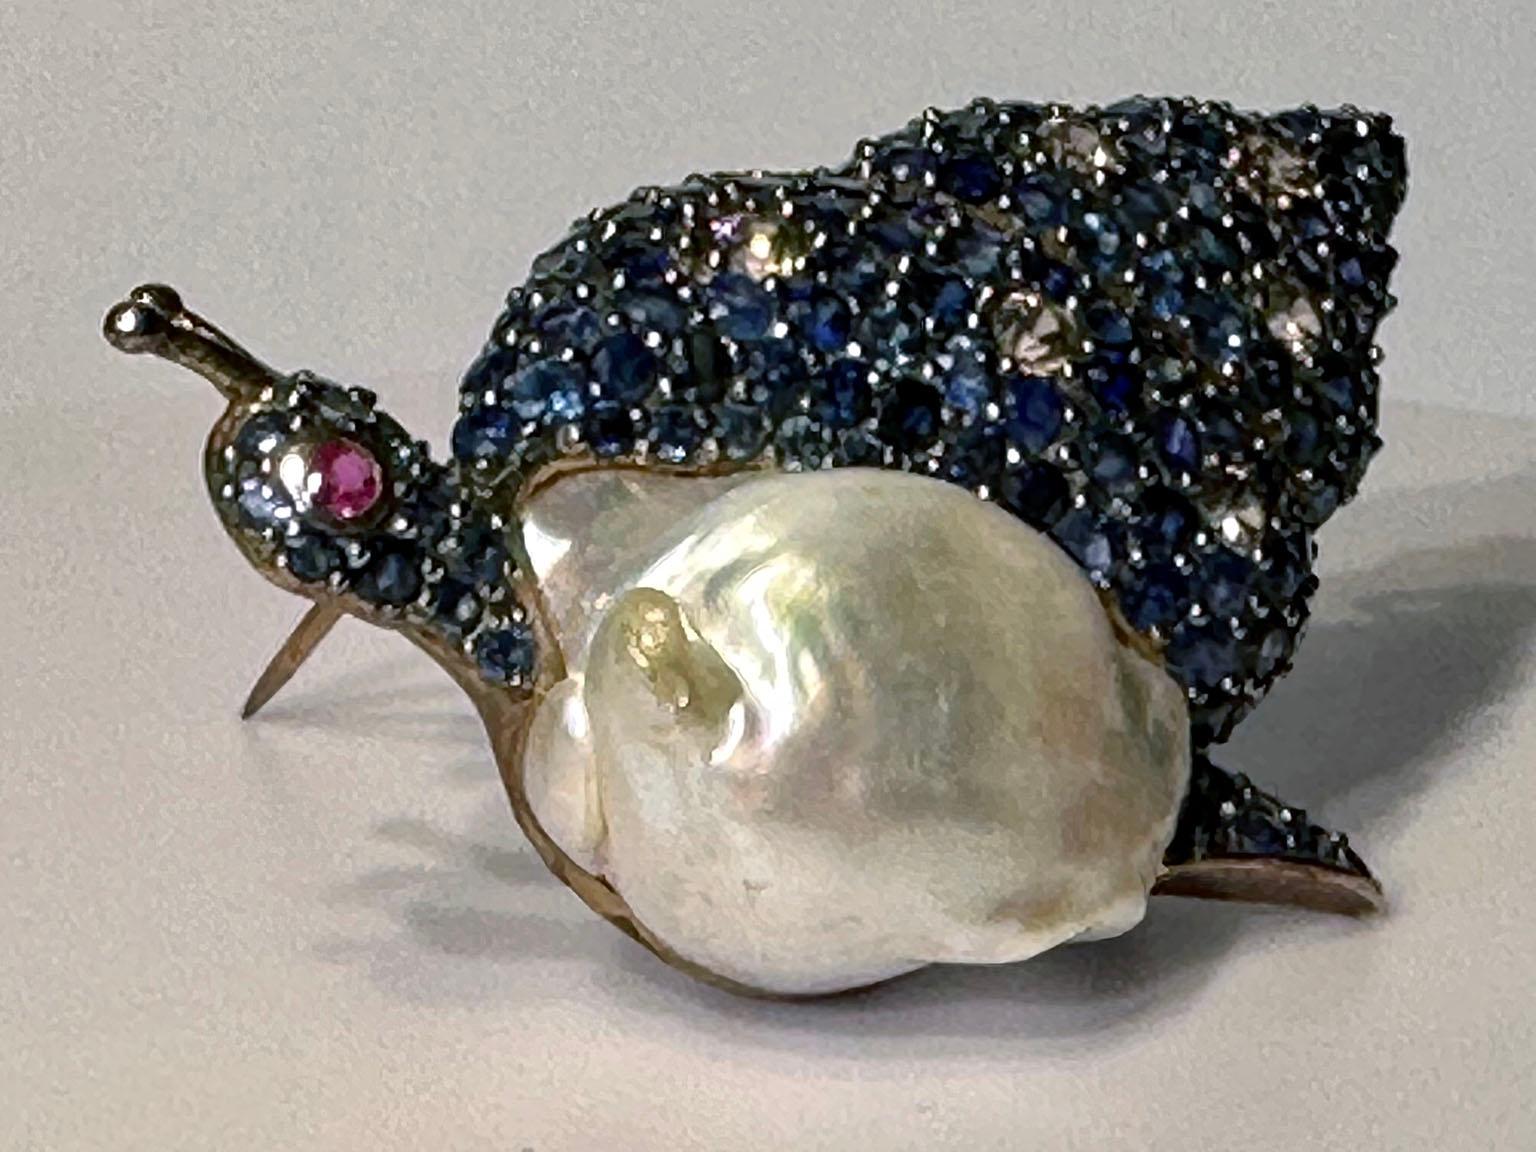 Blackened and Rose Gold Plated Silver Snail Brooch/Pendant For Sale 1